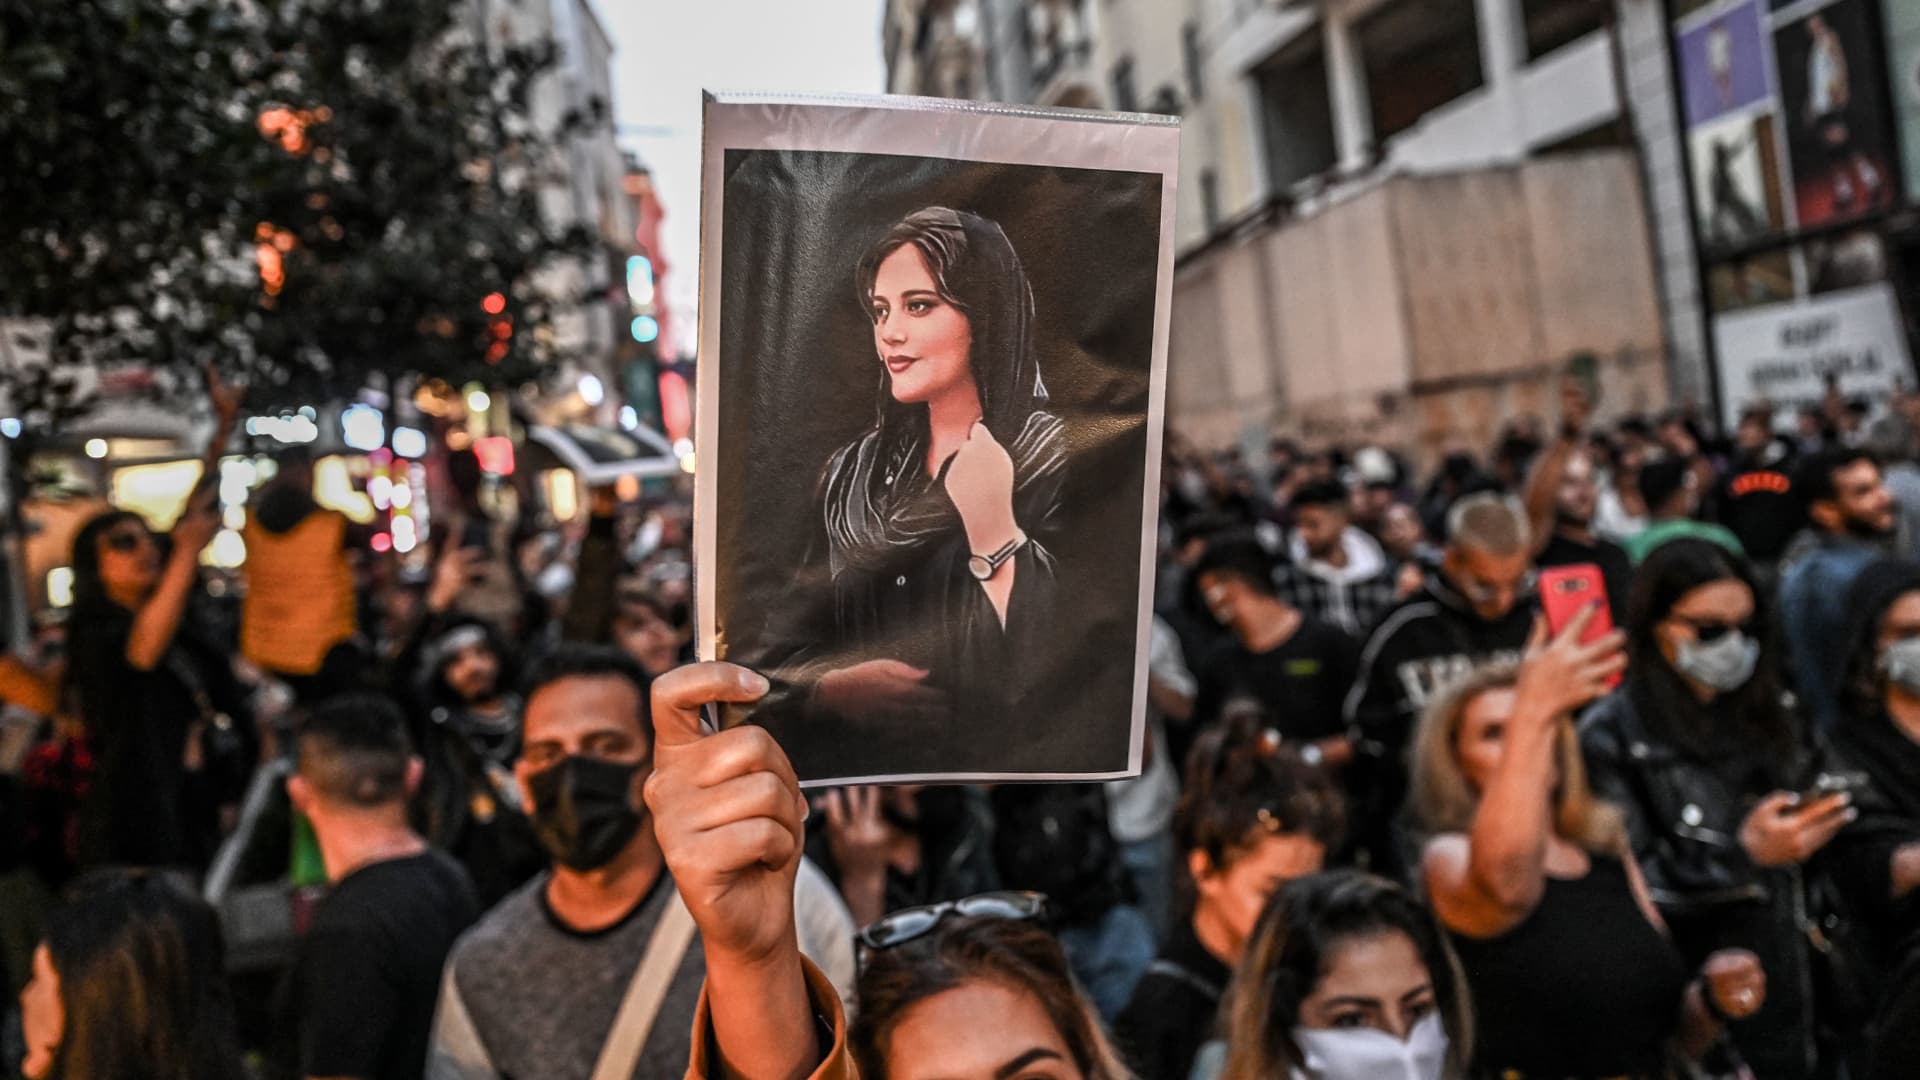 A protester holds a portrait of Mahsa Amini during a demonstration in support of Amini, a young Iranian woman who died after being arrested in Tehran by the Islamic Republic's morality police, on Istiklal avenue in Istanbul on September 20, 2022.